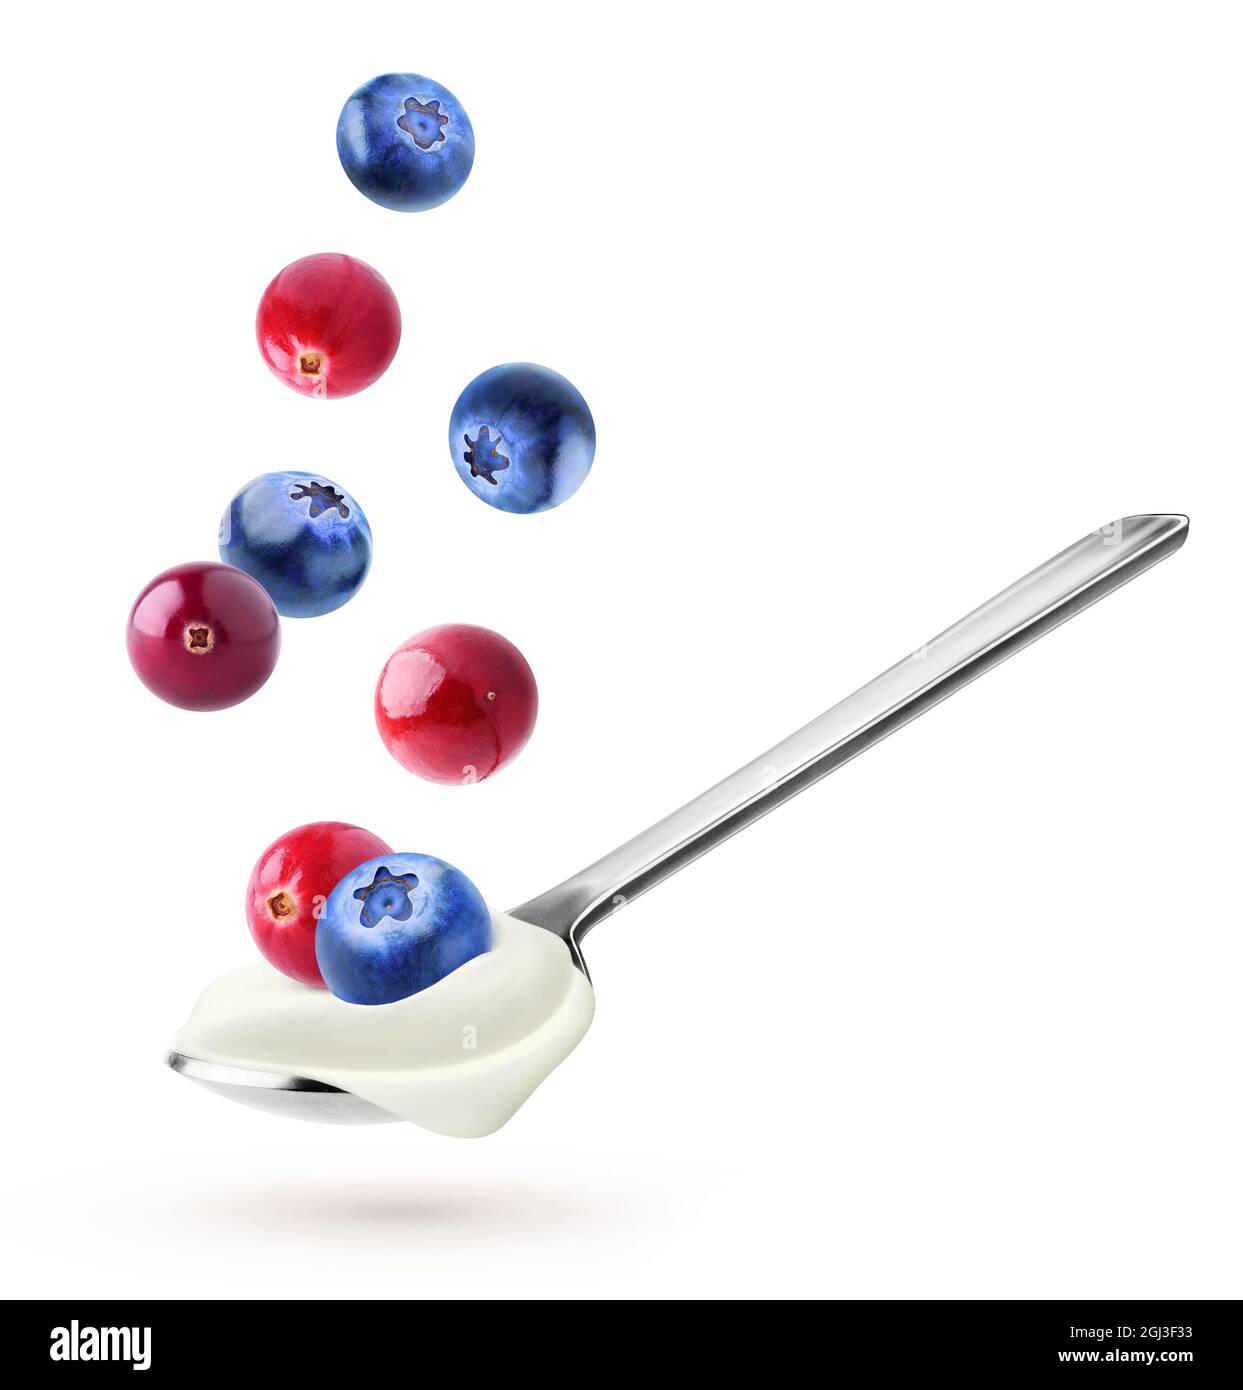 Isolated yogurt with fruits. Blueberries and cranberries flying over a spoon of greek yogurt solated on white background Stock Photo